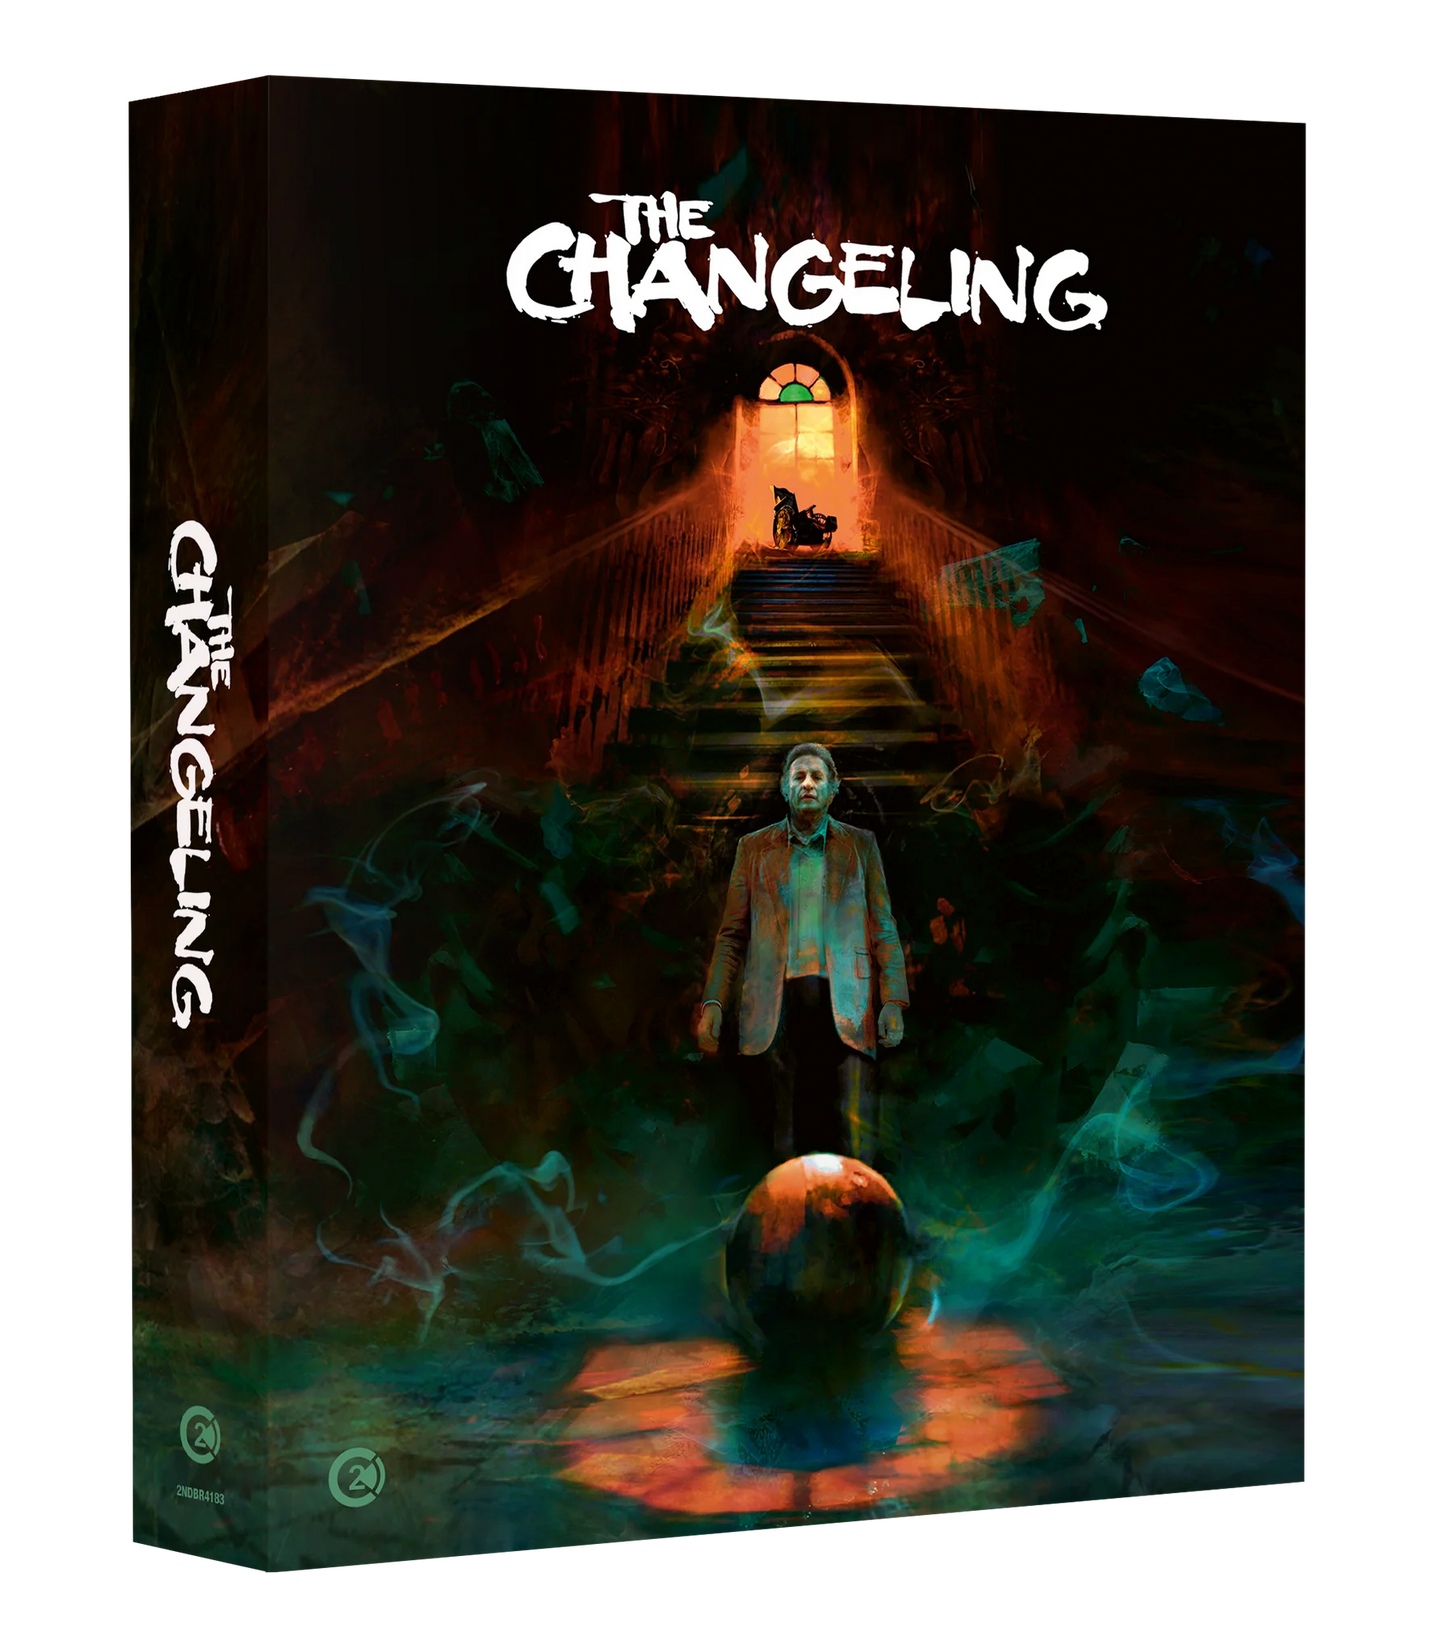 The Changeling Limited Edition Second Sight Films 4K UHD/Blu-Ray [NEW] [SLIPCOVER]